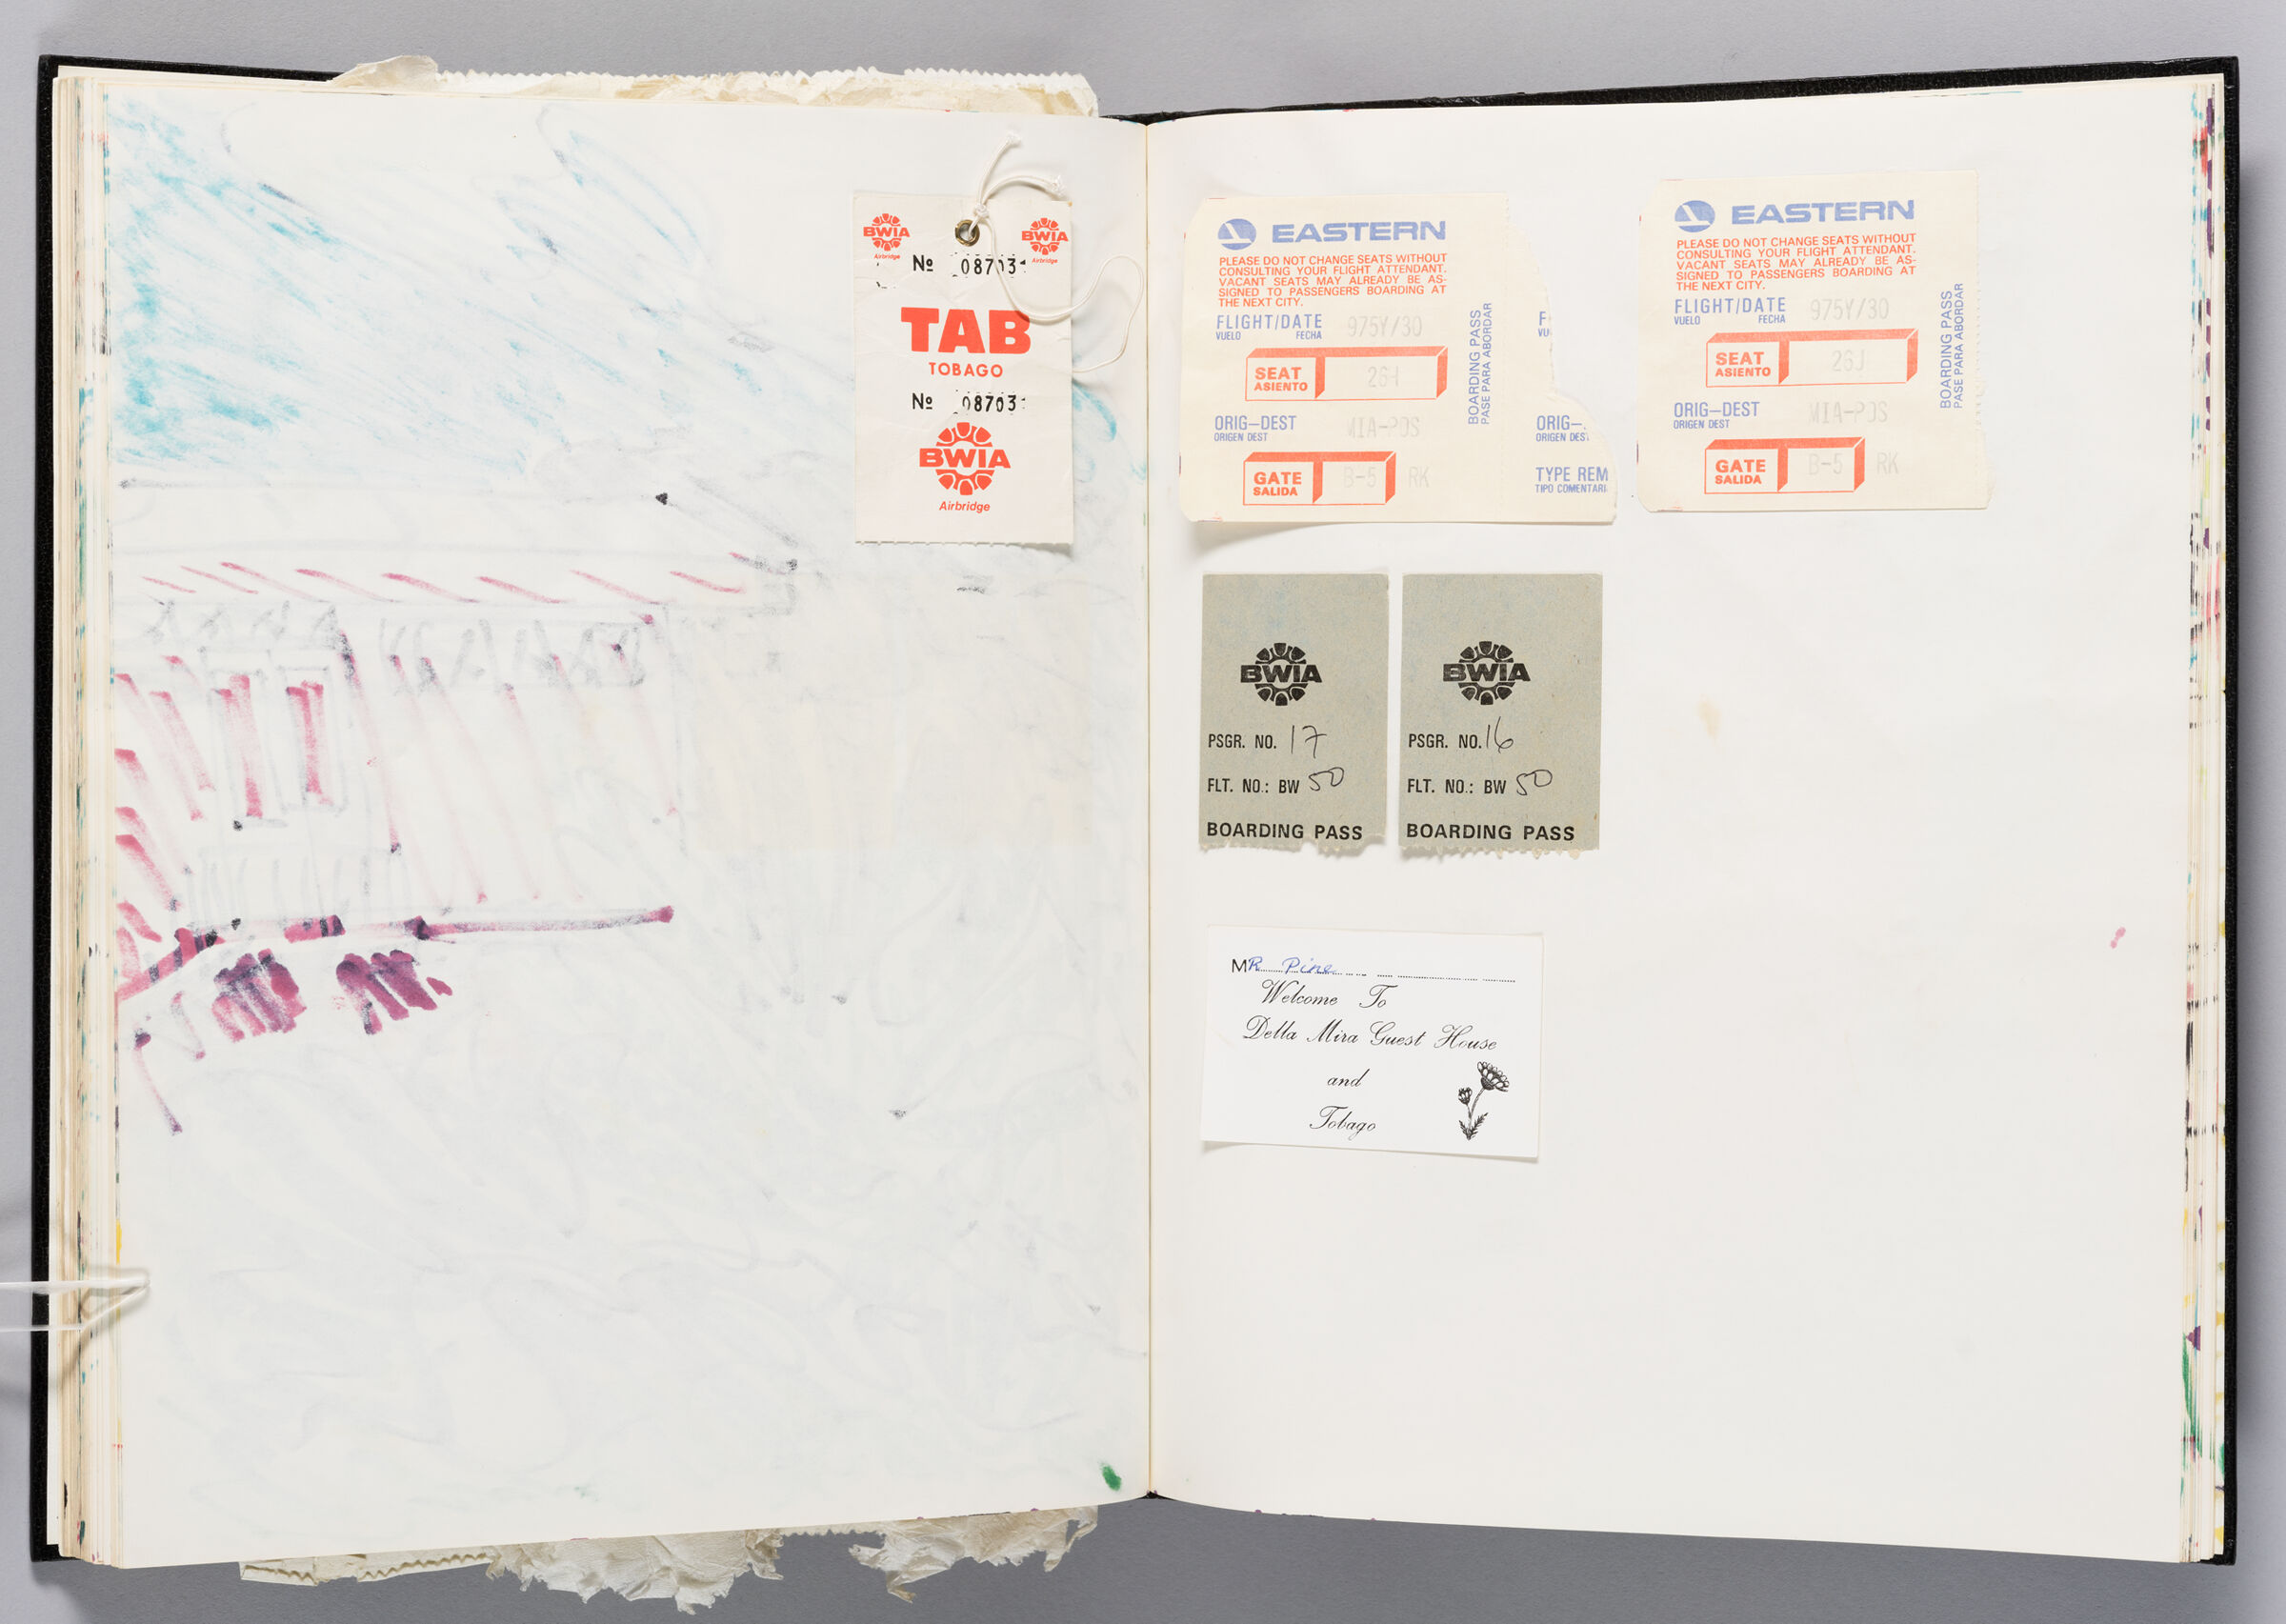 Untitled (Bleed-Through Of Previous Page And Luggage Tag, Left Page); Untitled (Adhered Travel Documents, Right Page)